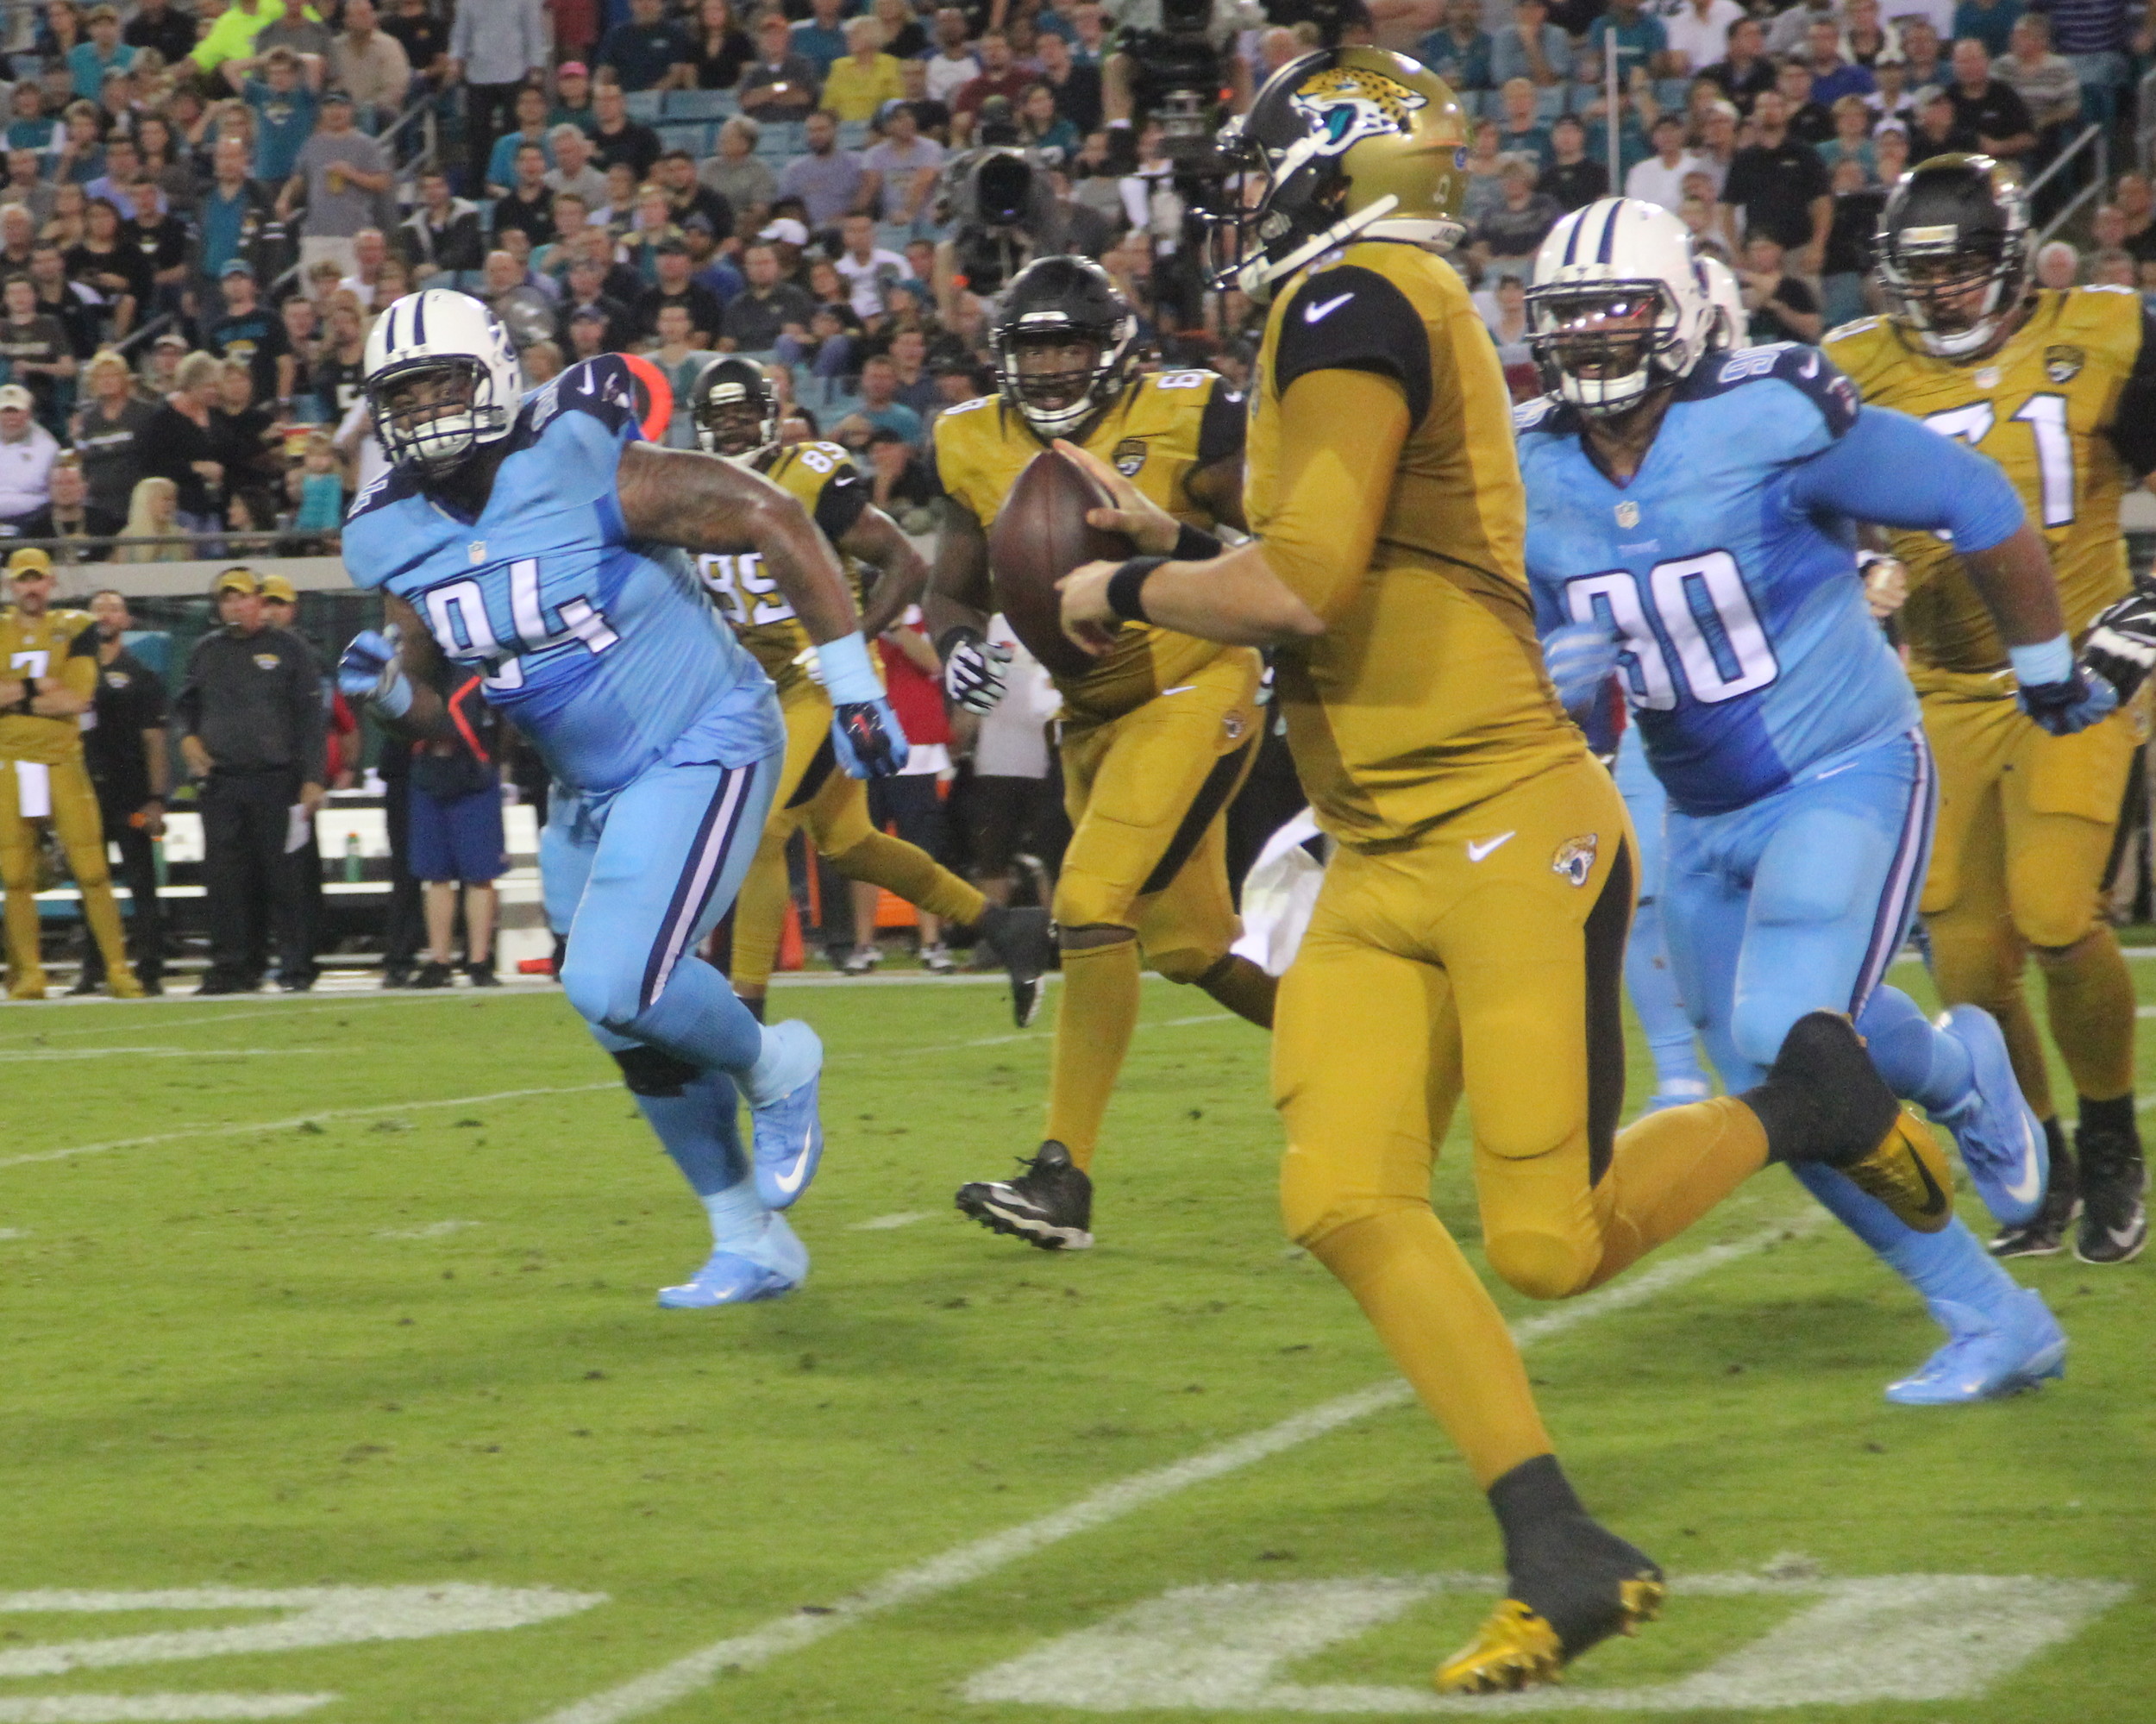 In the 19-13 win over the Titans Jacksonville quarterback Blake Bortles was 21-of-30 for 242 yards, with a fumble, and interception and a touchdown pass to tight end Julius Thomas. (Photo by Nancy Beecher)